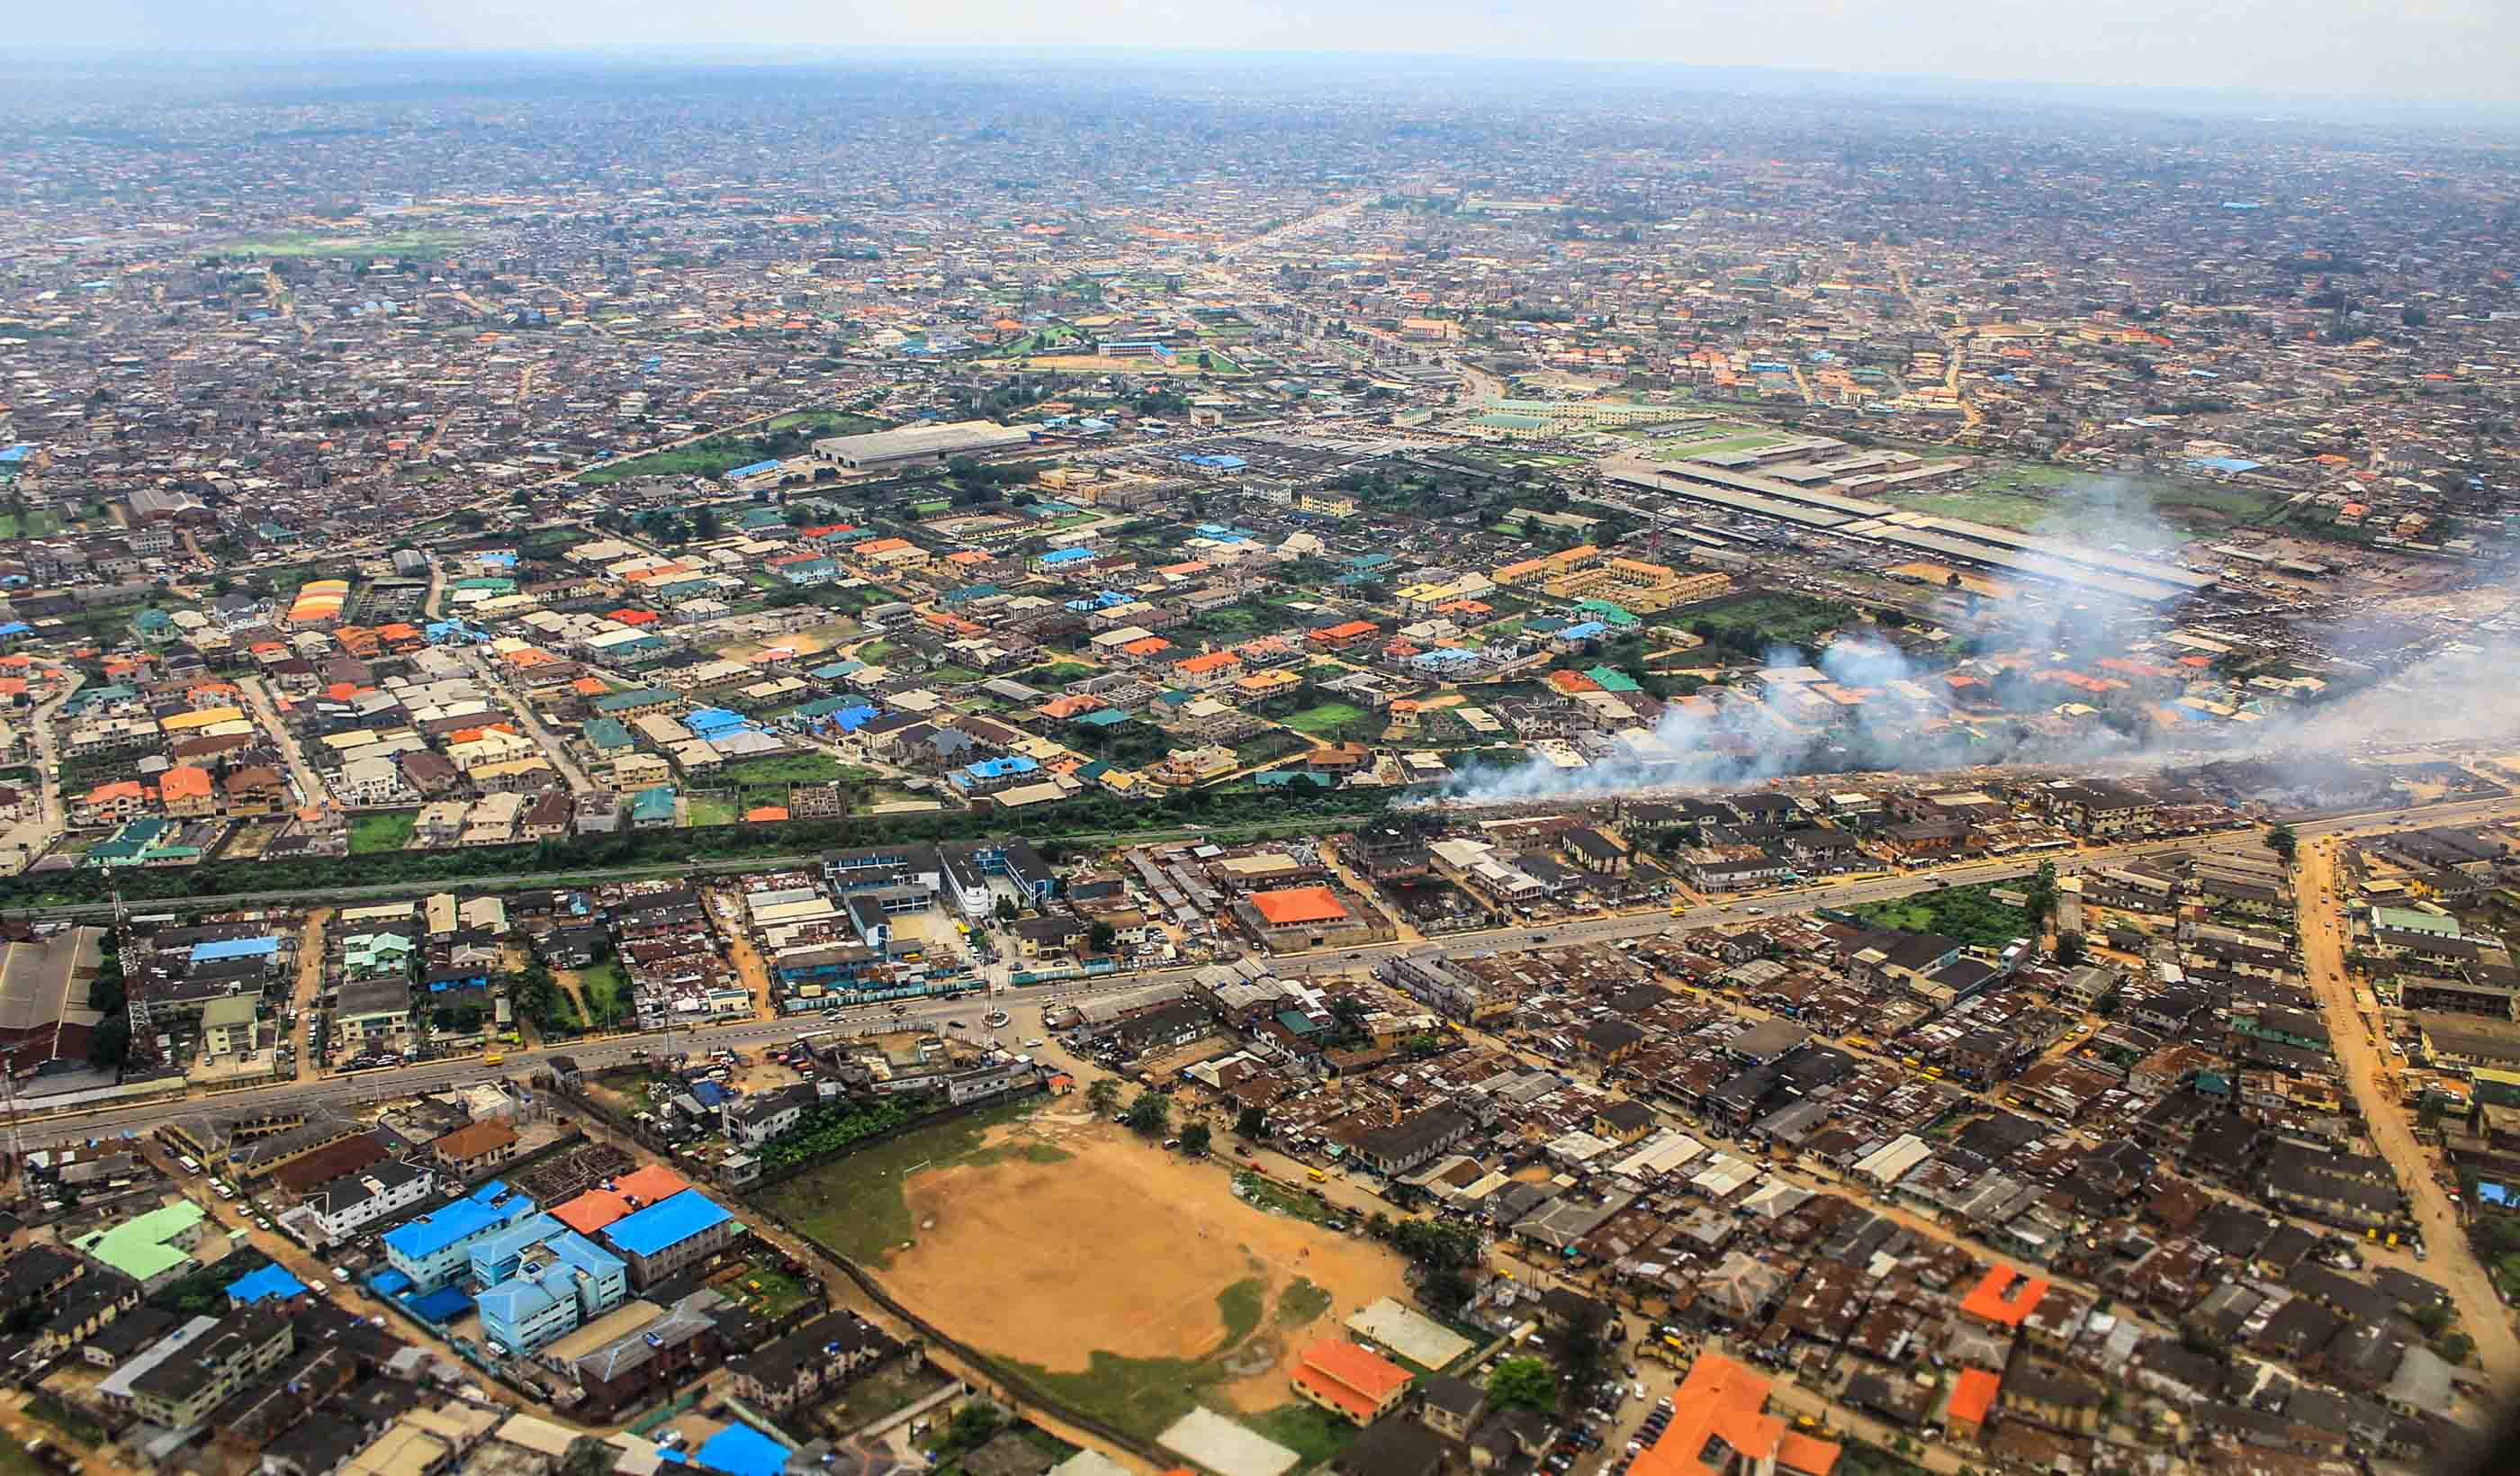 Published in Water Briefing Global: David Smith on the benefits of resilient megacities